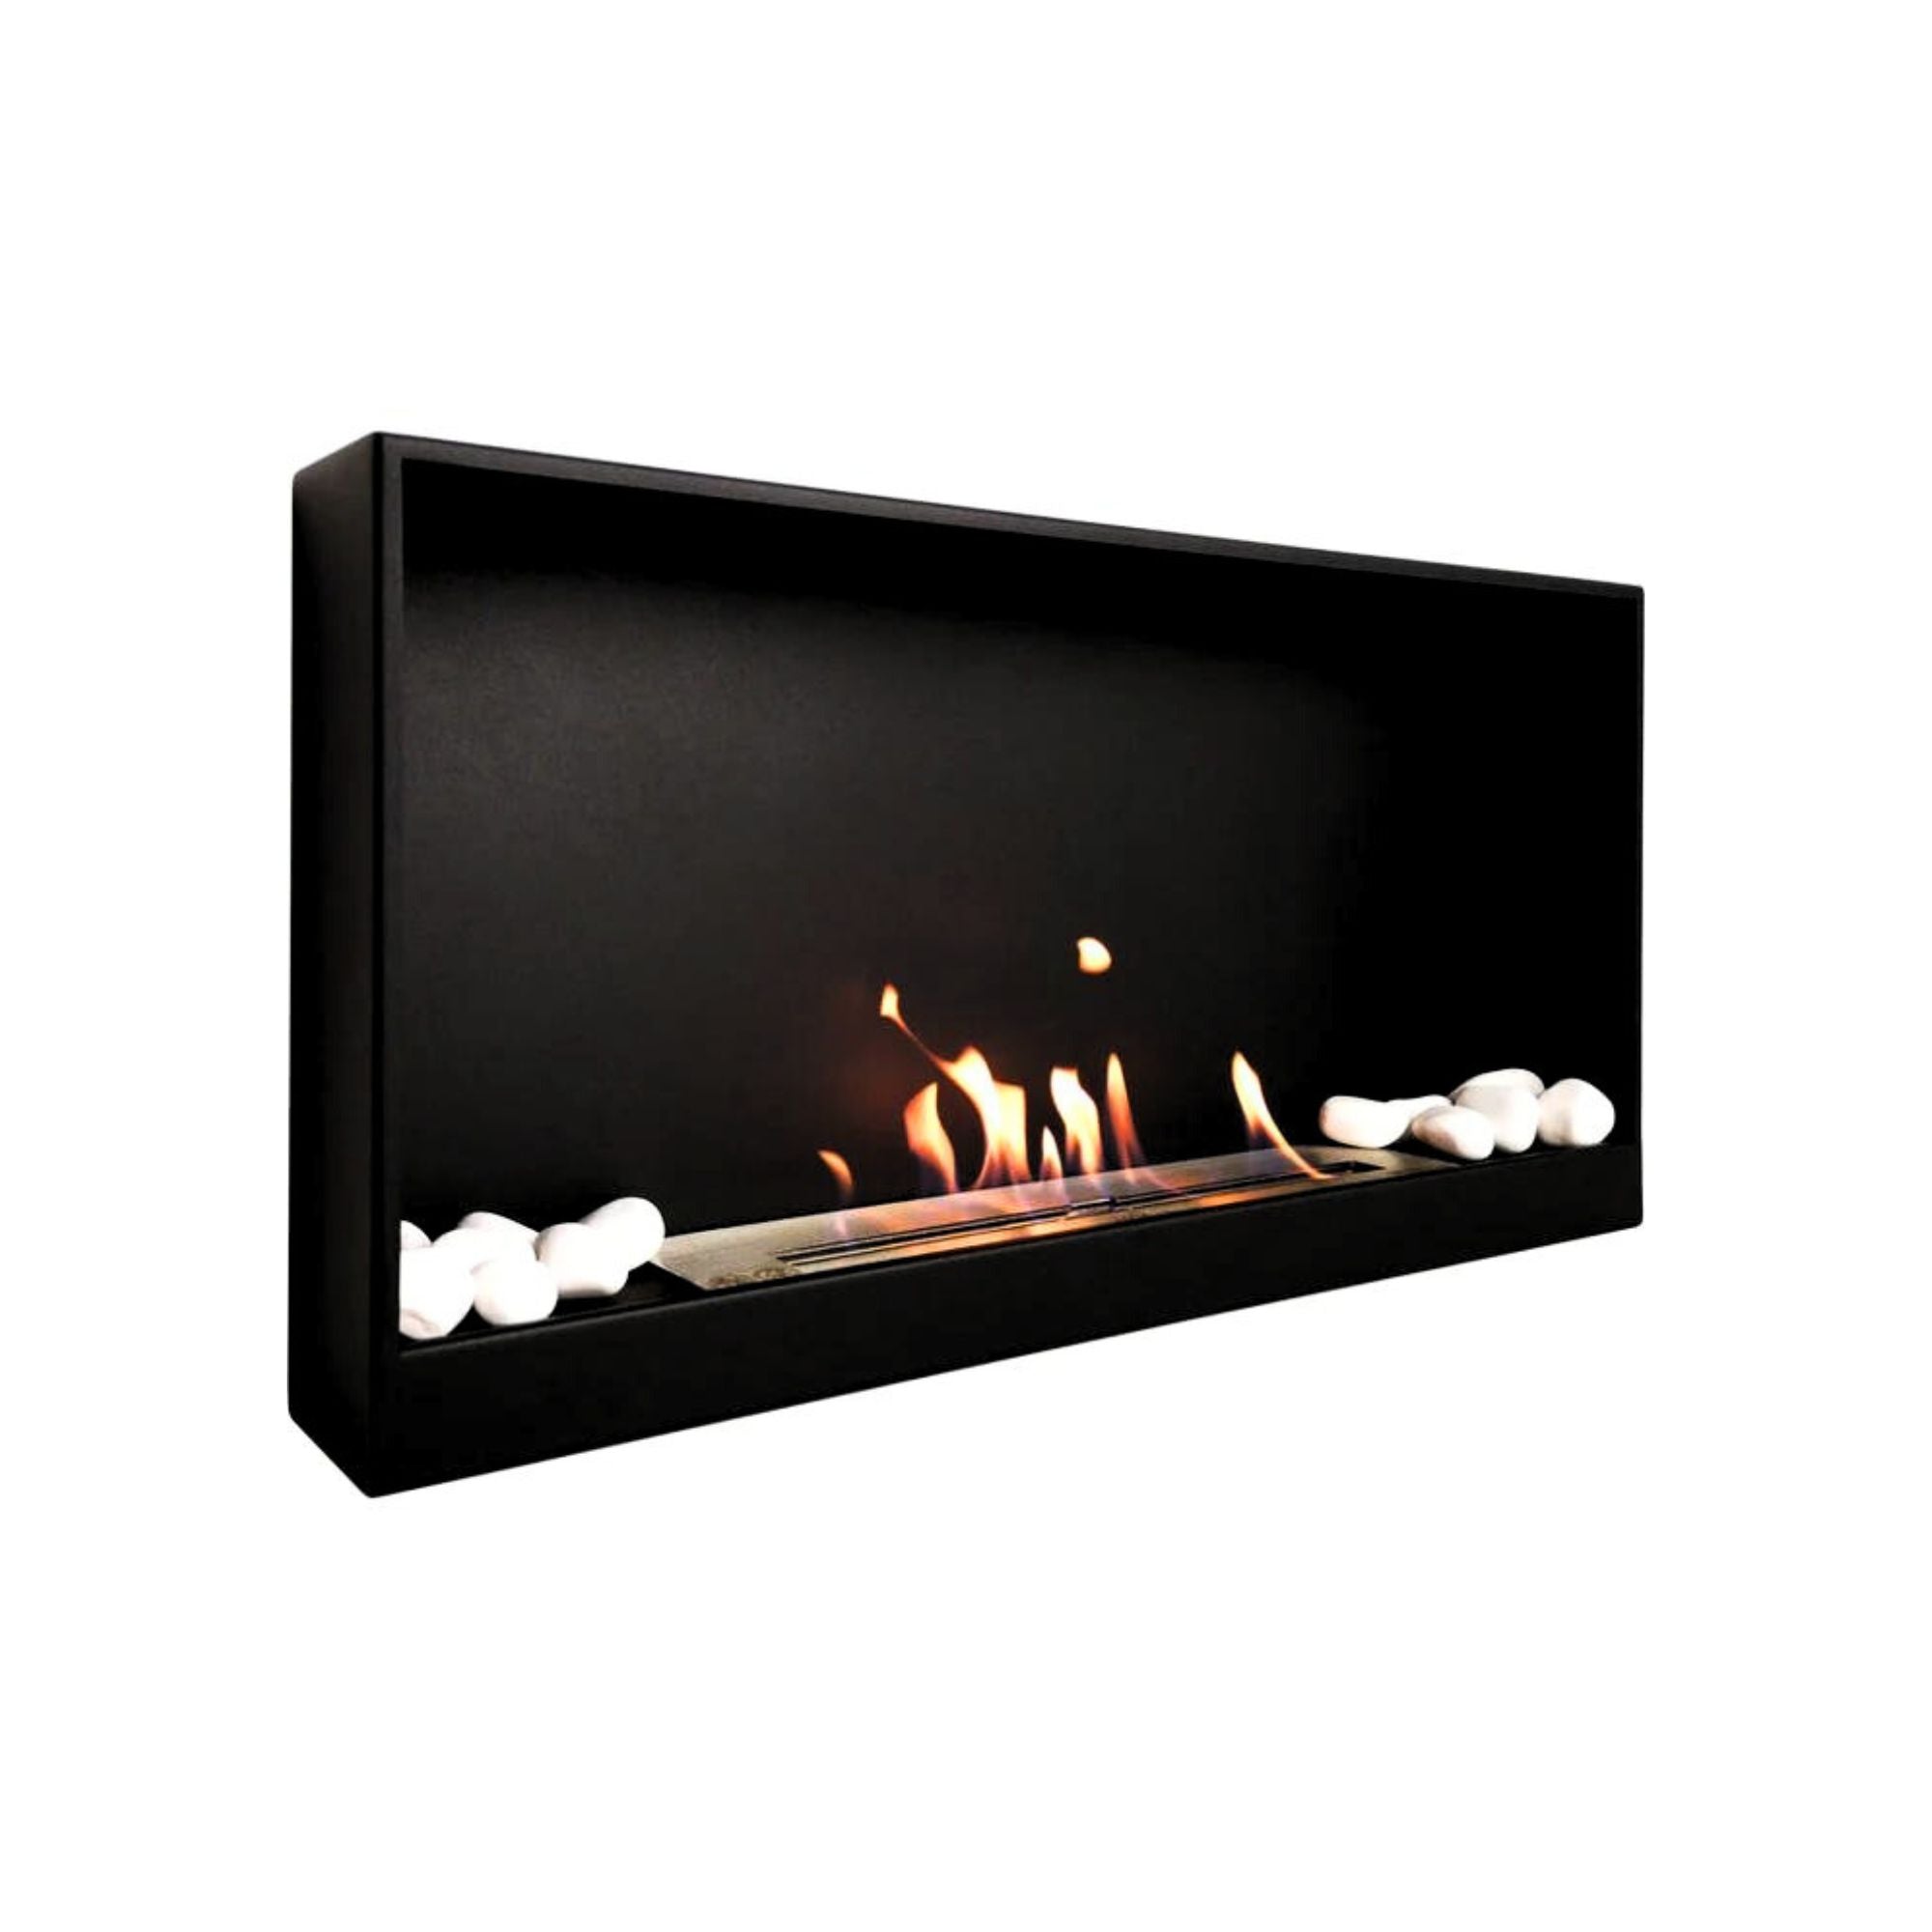 Betto Bio-Ethanol Built-in Fireplace 80 CM